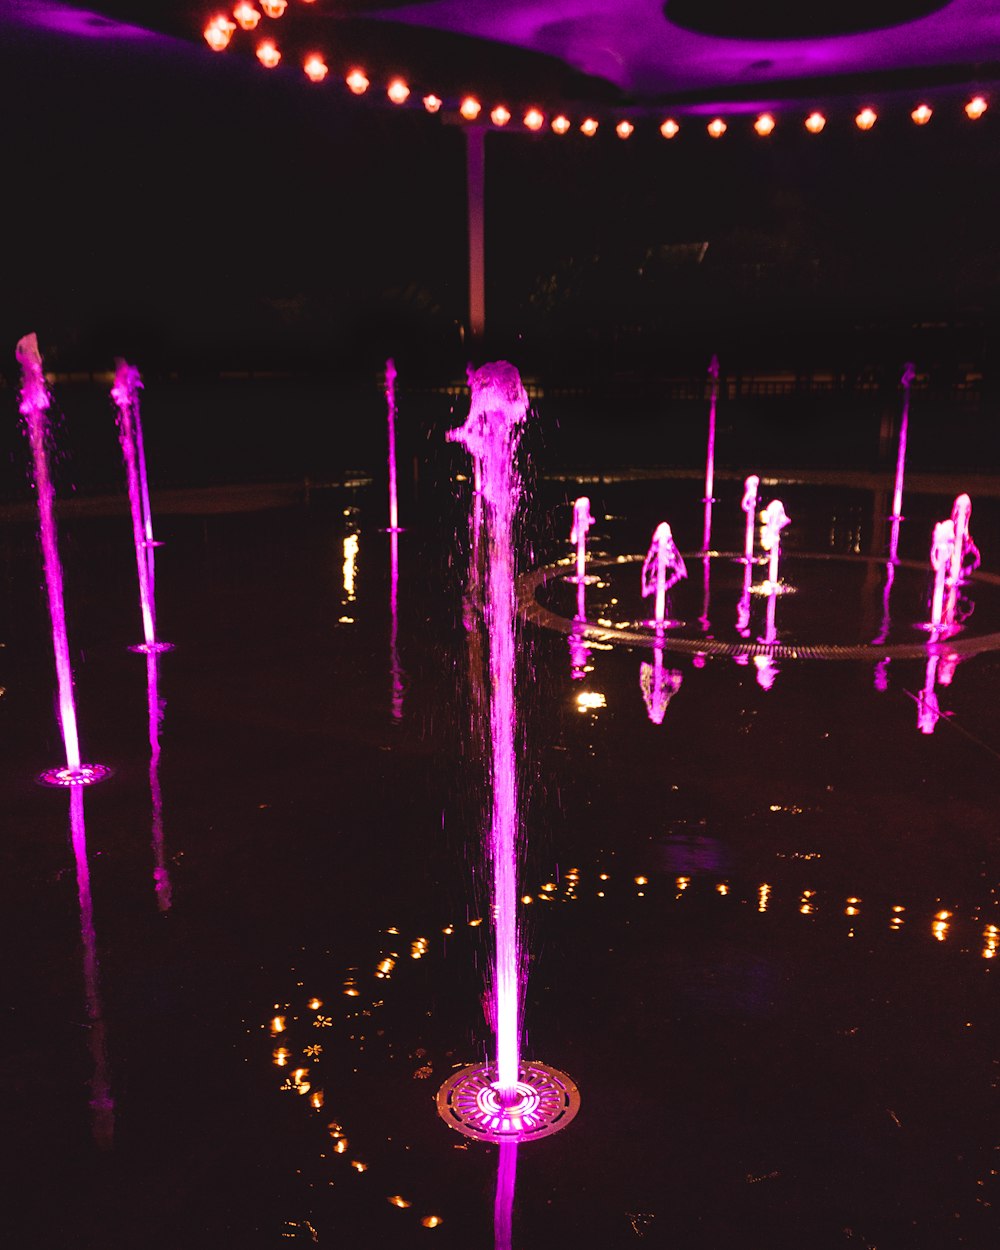 purple fountain at night time